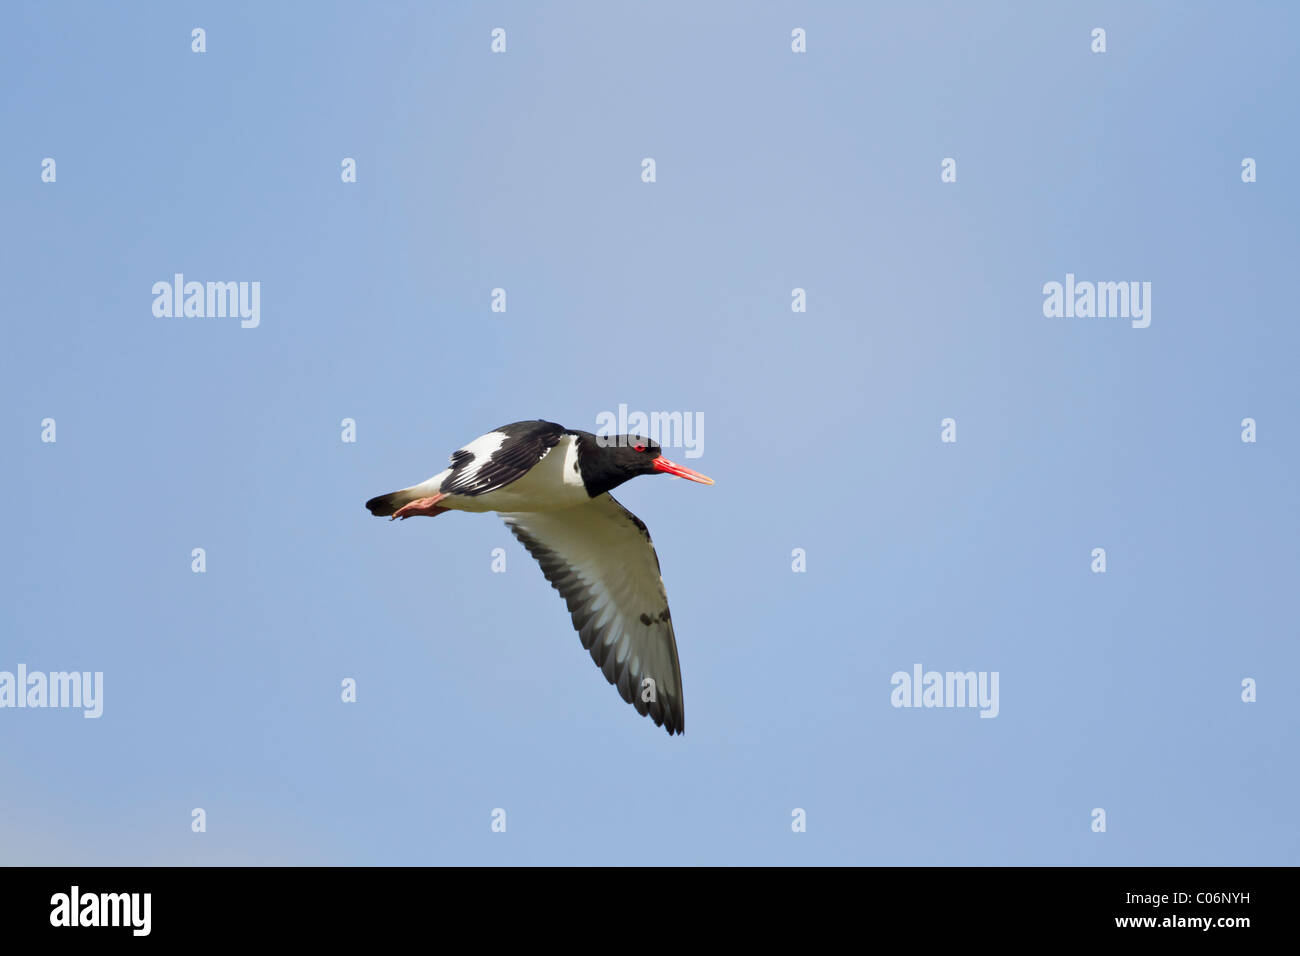 Oystercatcher in flight against a blue sky Stock Photo